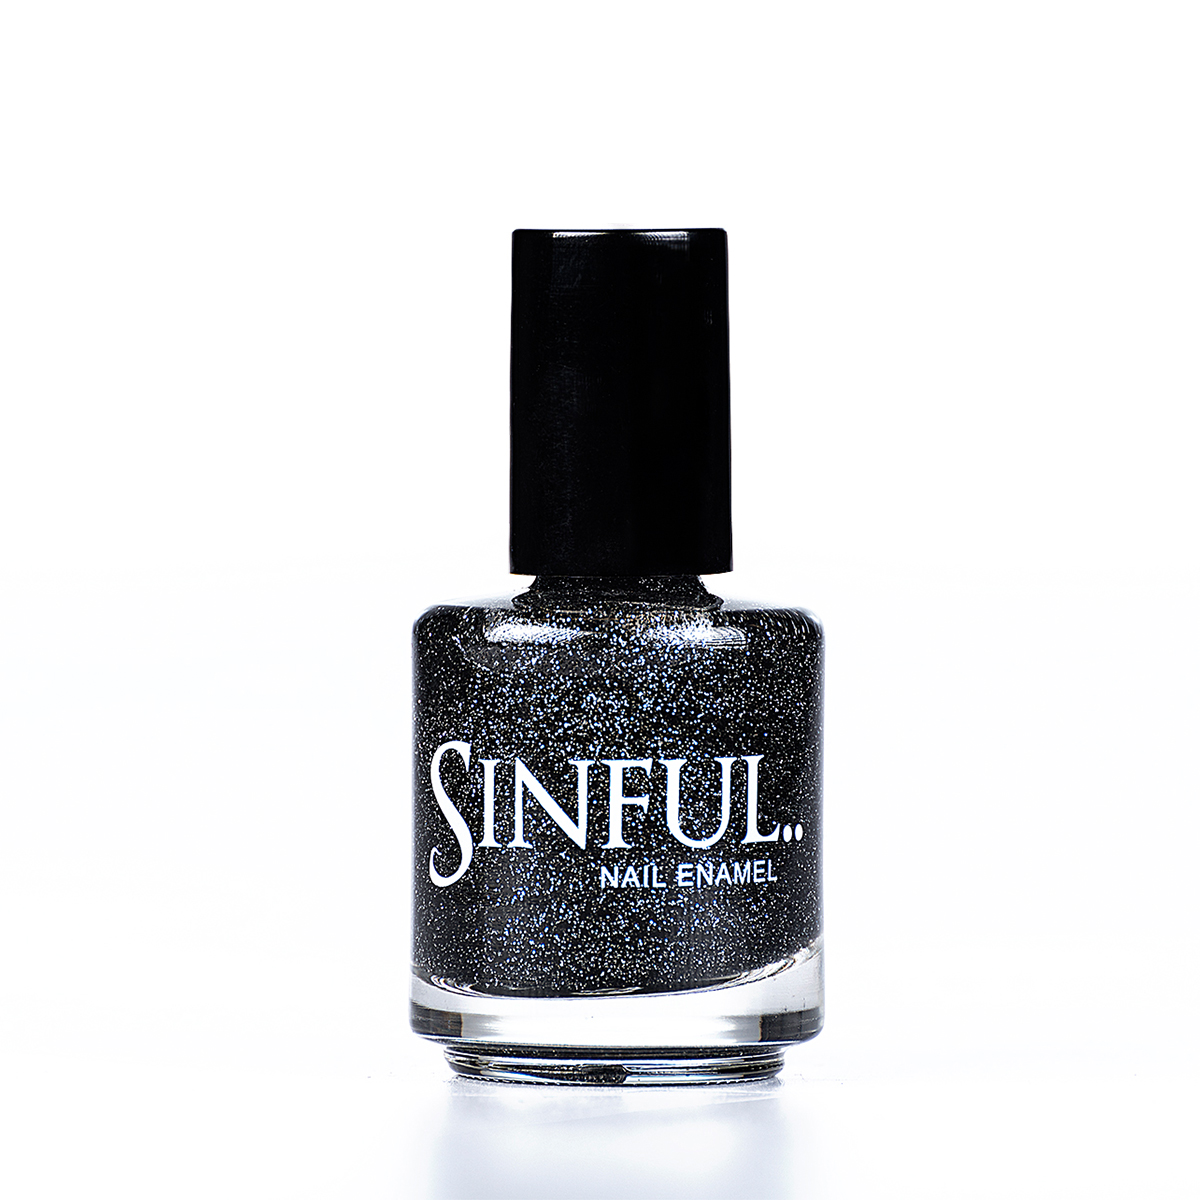 Black and pewter glitter. Sinful always recommends applying two coats of polish to give a solid colour, then applying top coat to extend the wear-time of the polish. 15ml